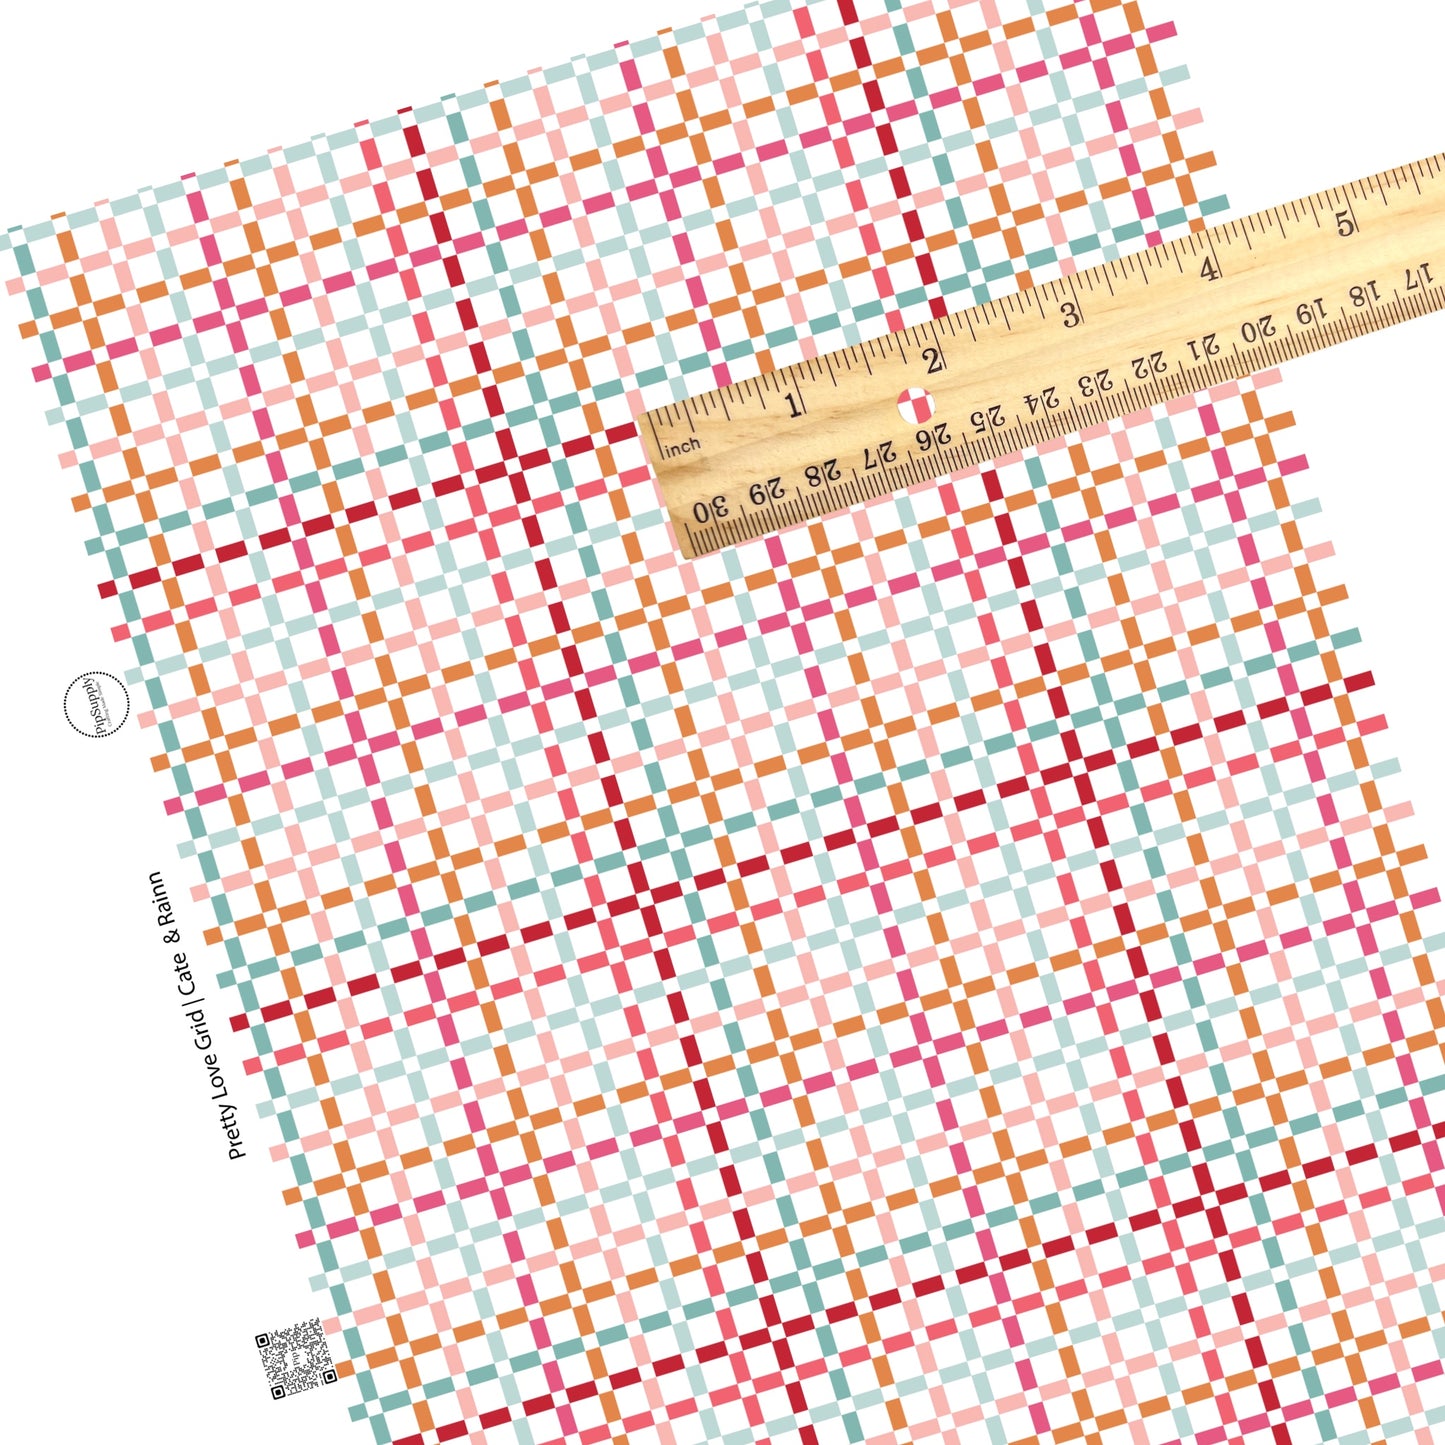 Hot pink, red, light pink, teal, and blue, orange plaid on white square faux leather sheets